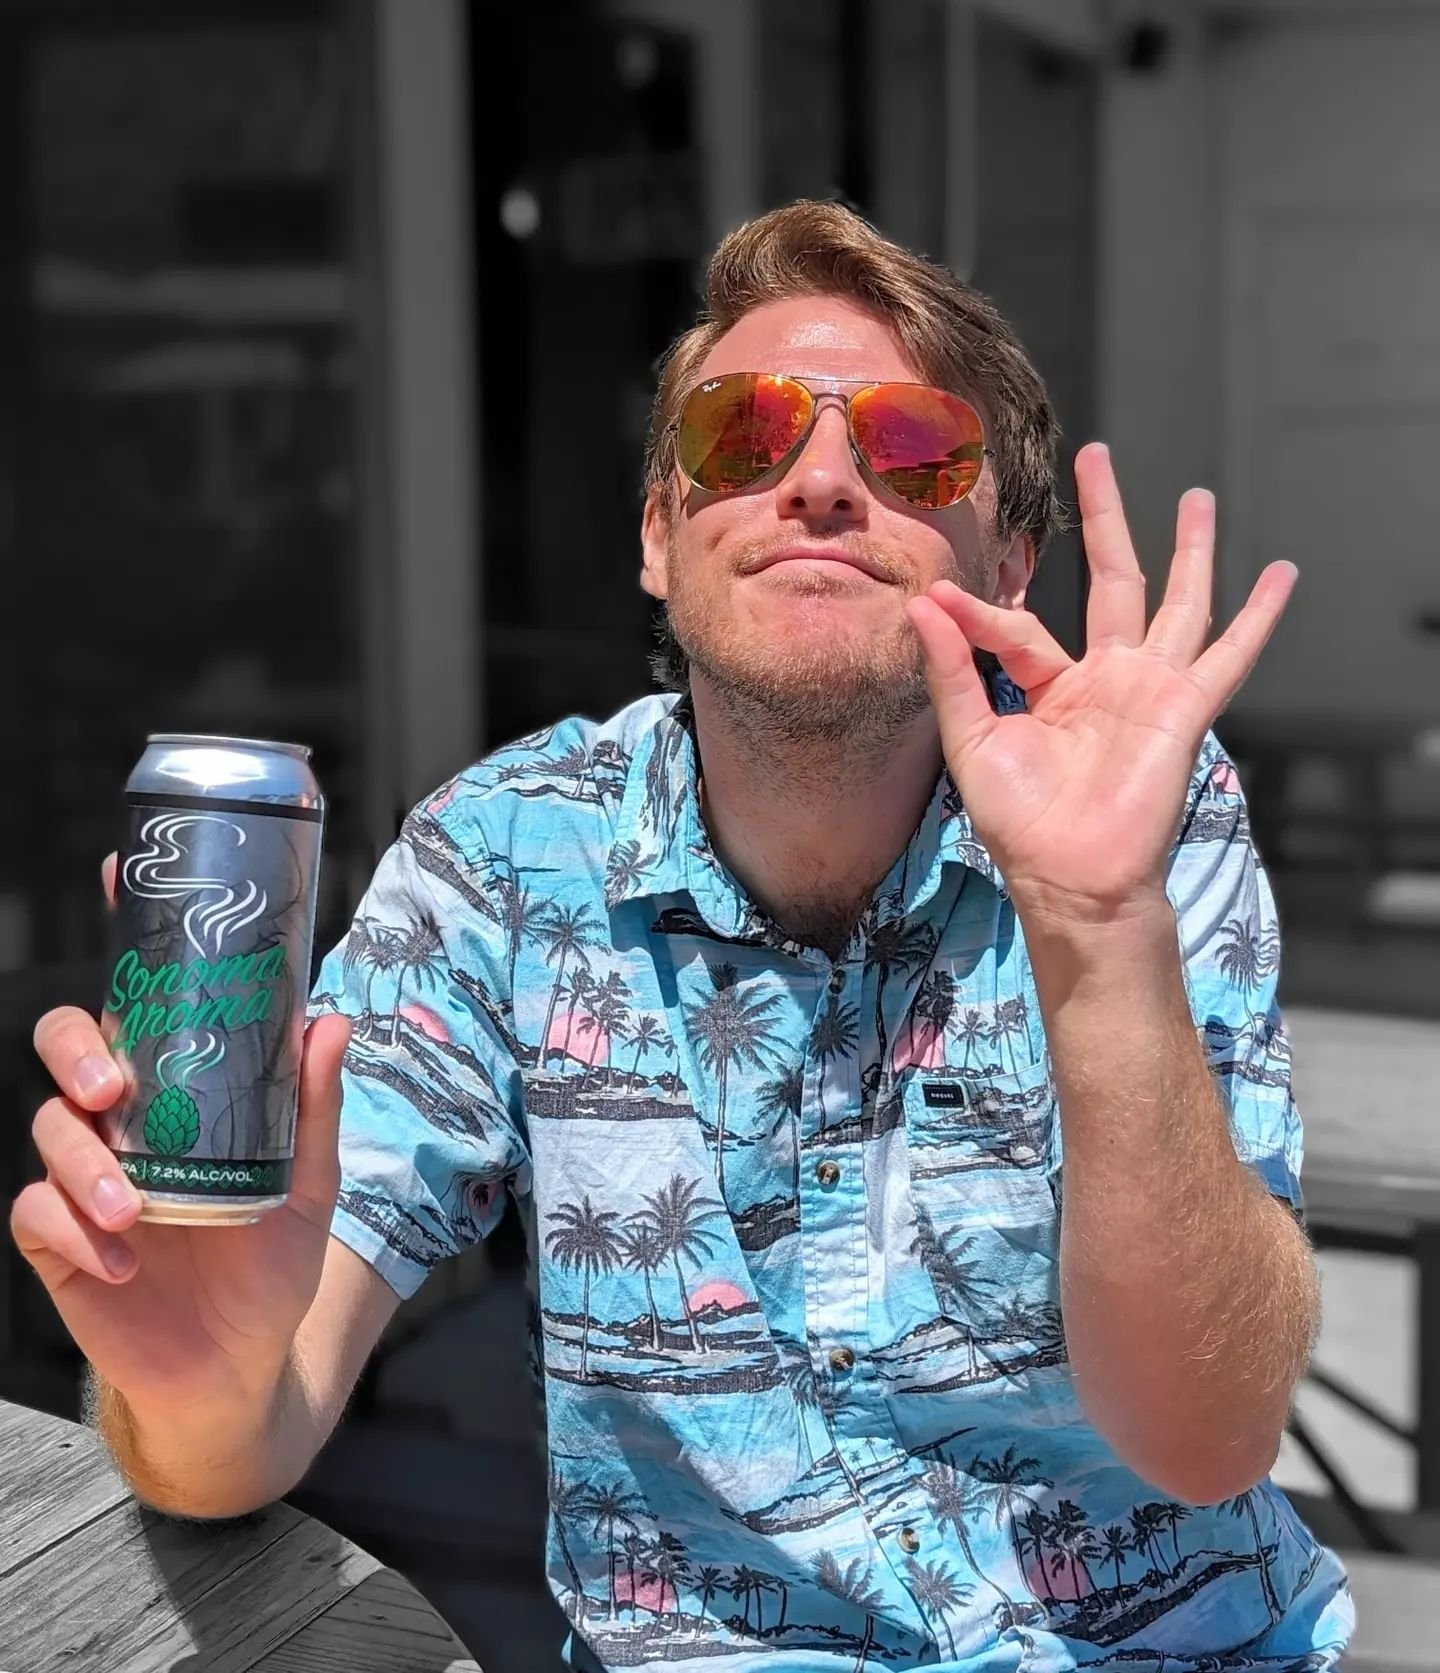 is that hunter s. thompson? no, it's taylor and he is excited for the release of sonoma aroma. 

citra, strata, altus, eureka, &amp; enigma bring a powerful punch of uber dank, soft and citrusy, big fruit notes, and grassy qualities that remind us al